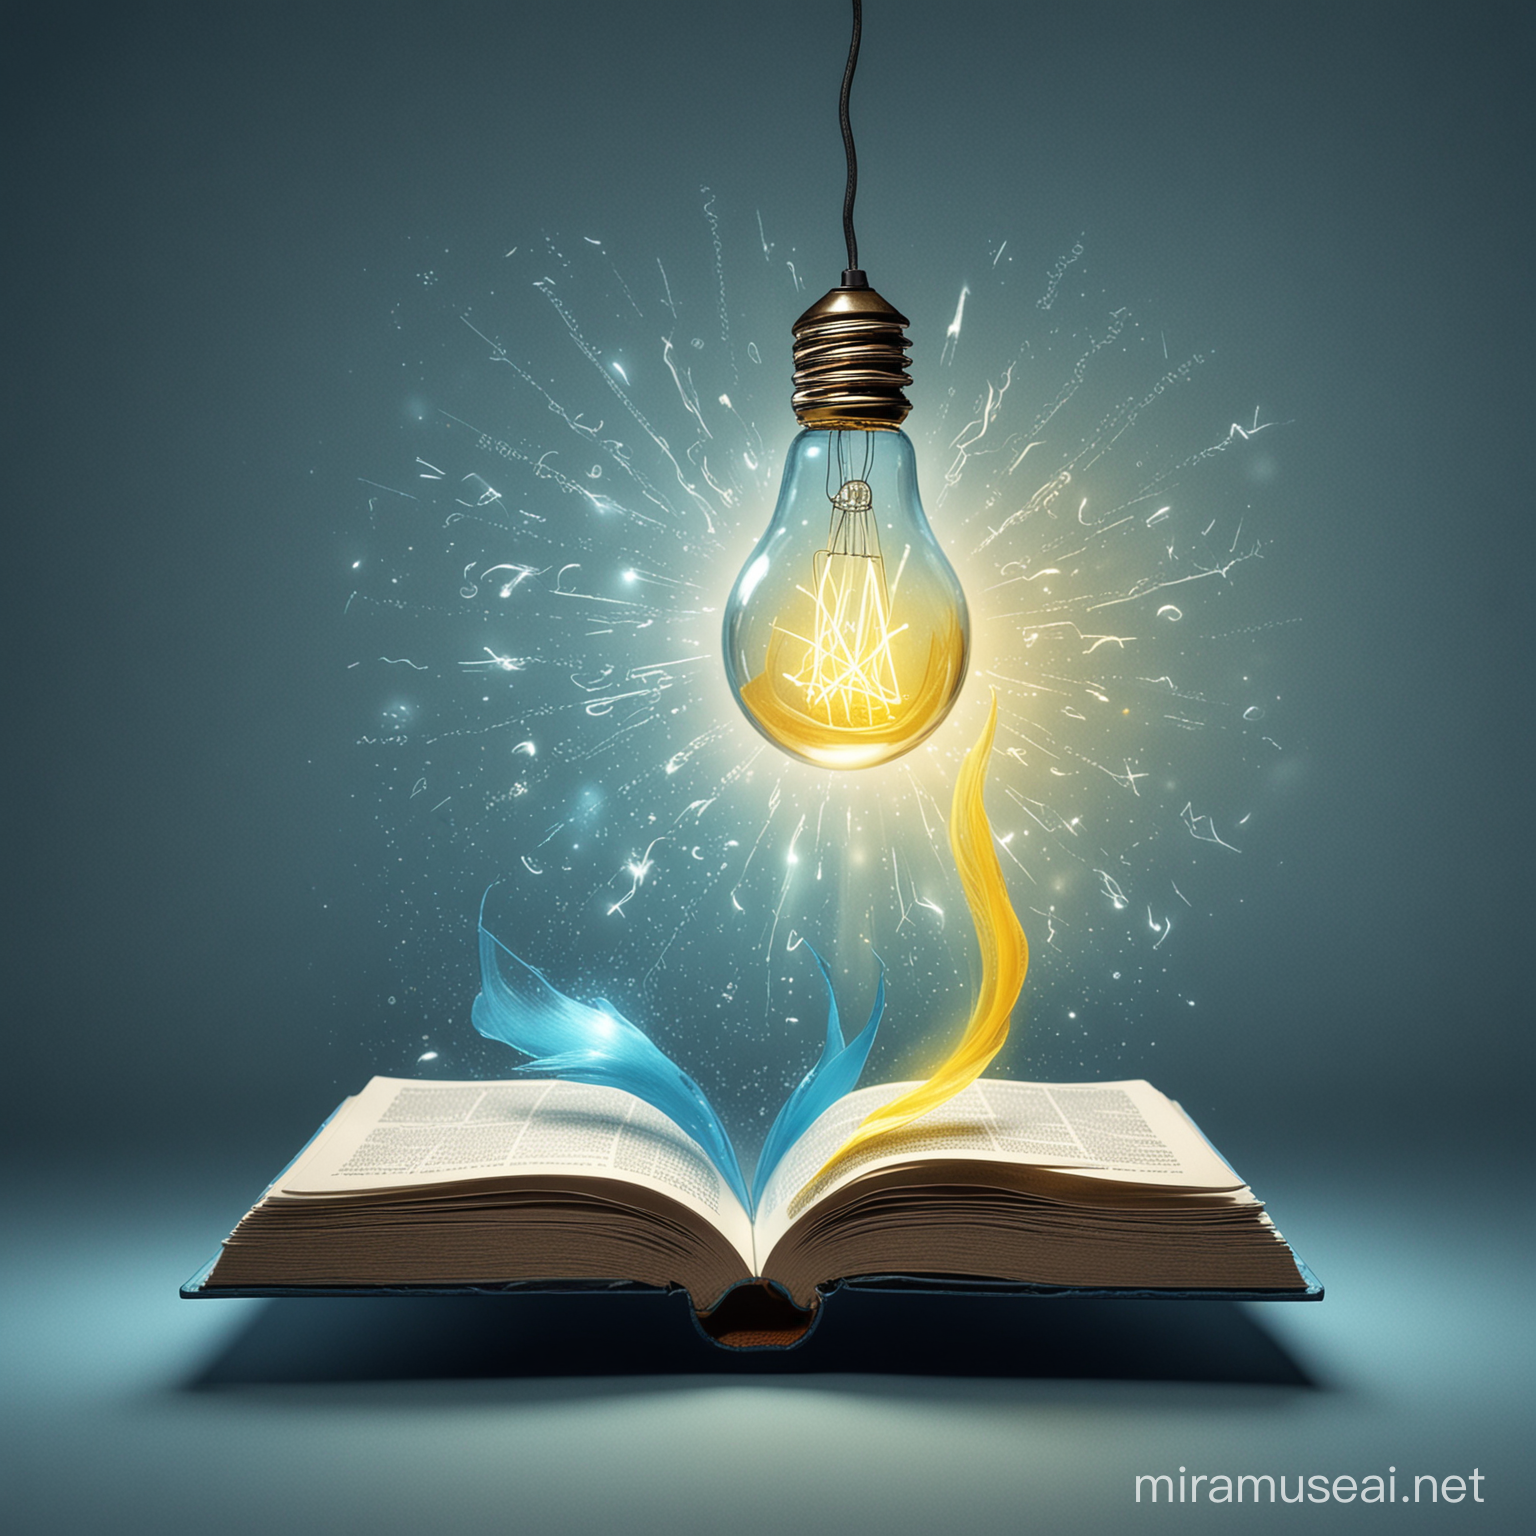 Imagery: An open book with a stylized light bulb emerging from it, representing the spark of knowledge and ideas generated through learning and interaction.
Colors: Use your primary color (e.g., blue) for the book and a bright yellow for the light bulb.